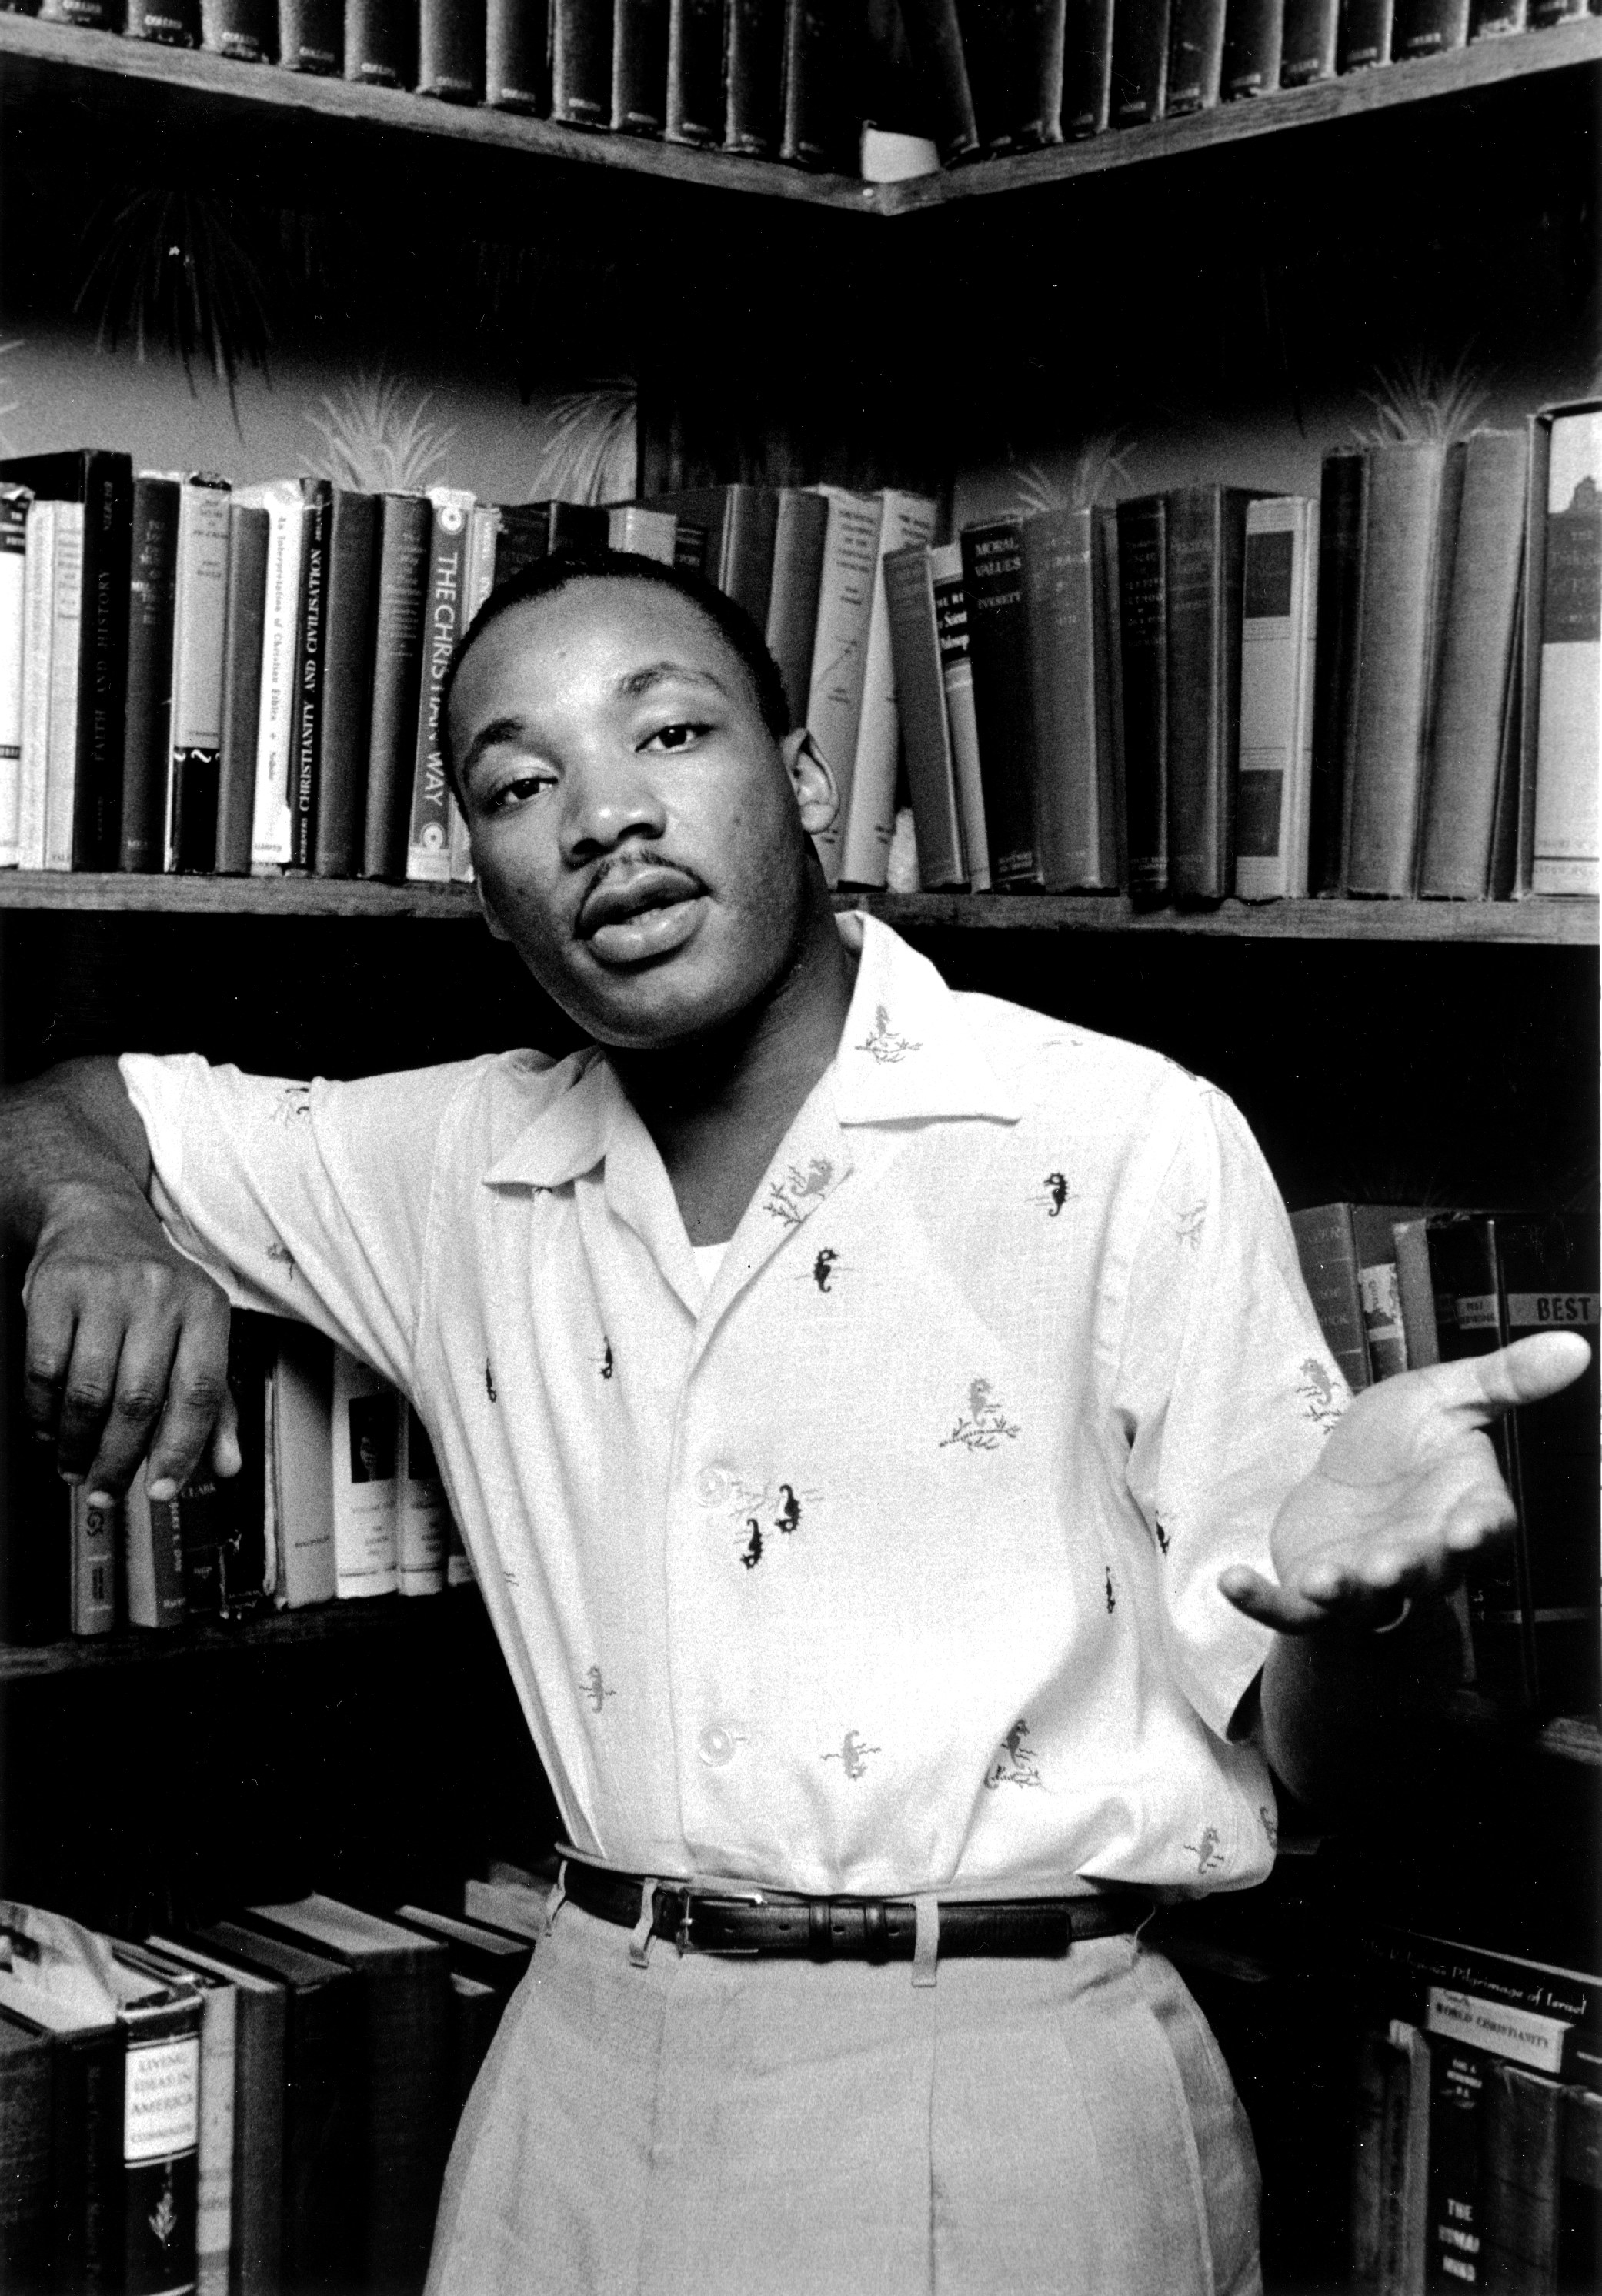 Dr King poses for a photo